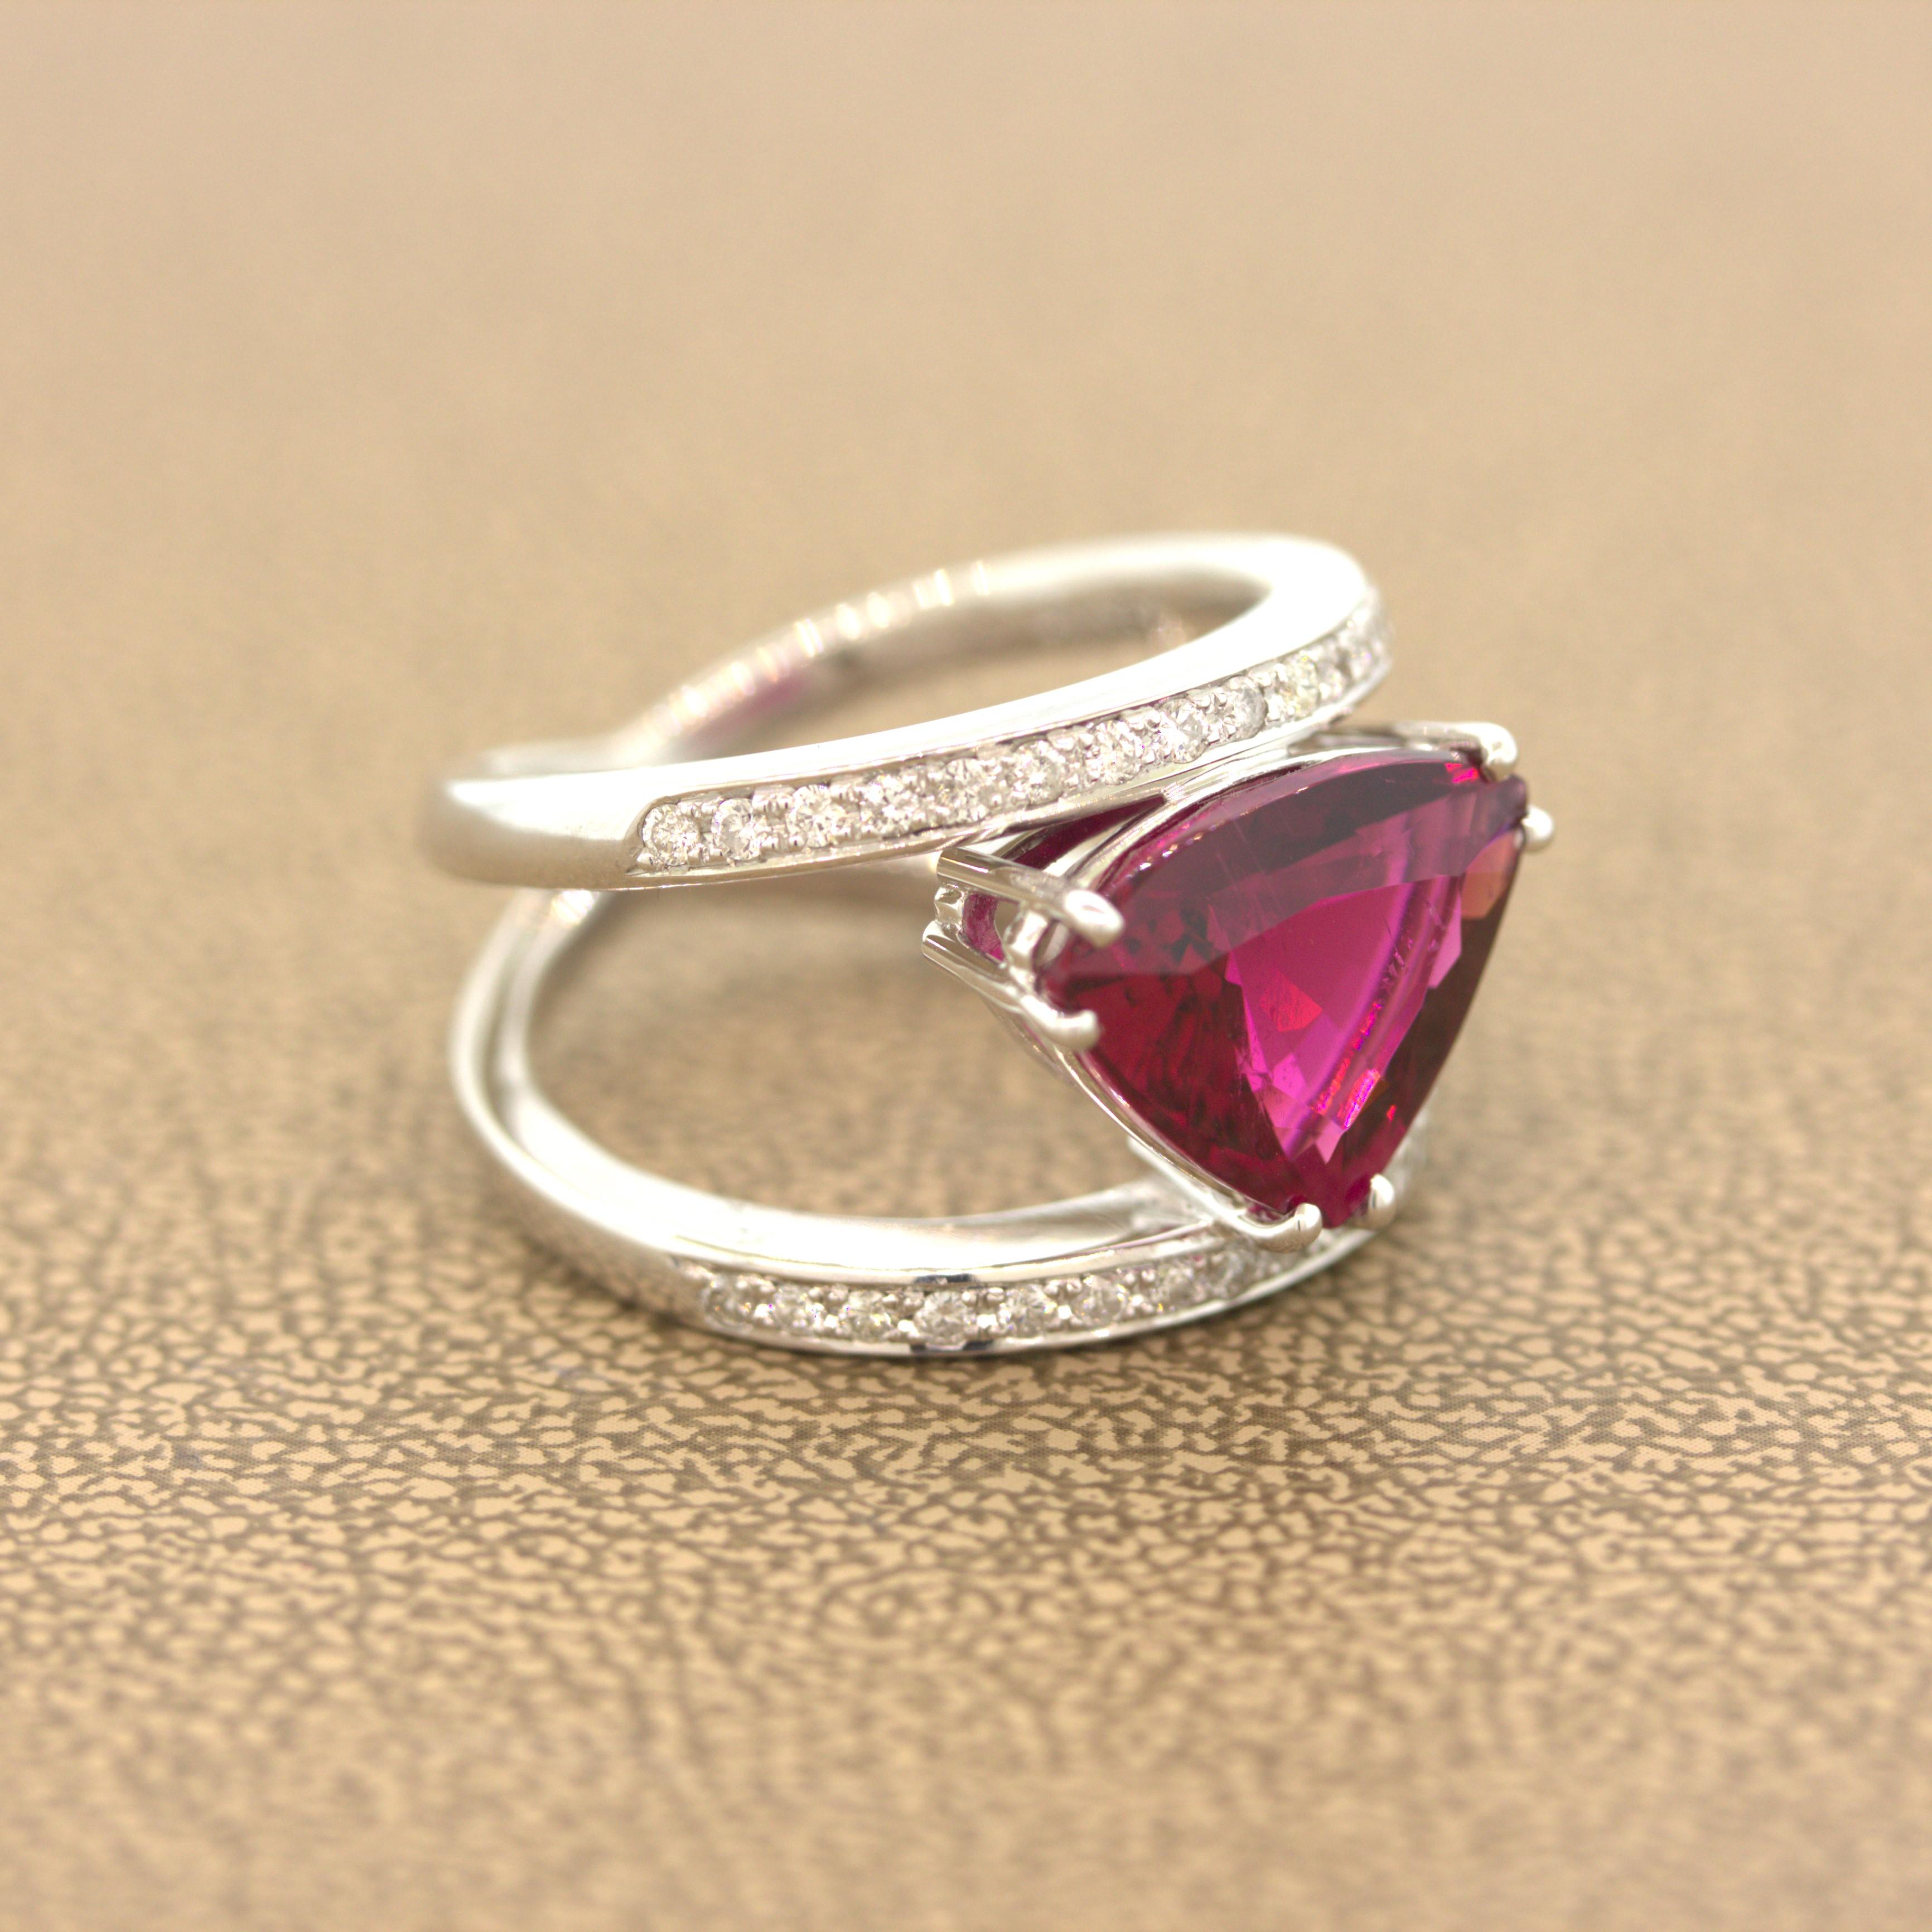 5.30 Carat Rubellite Tourmaline Diamond Gold Ring In New Condition For Sale In Beverly Hills, CA